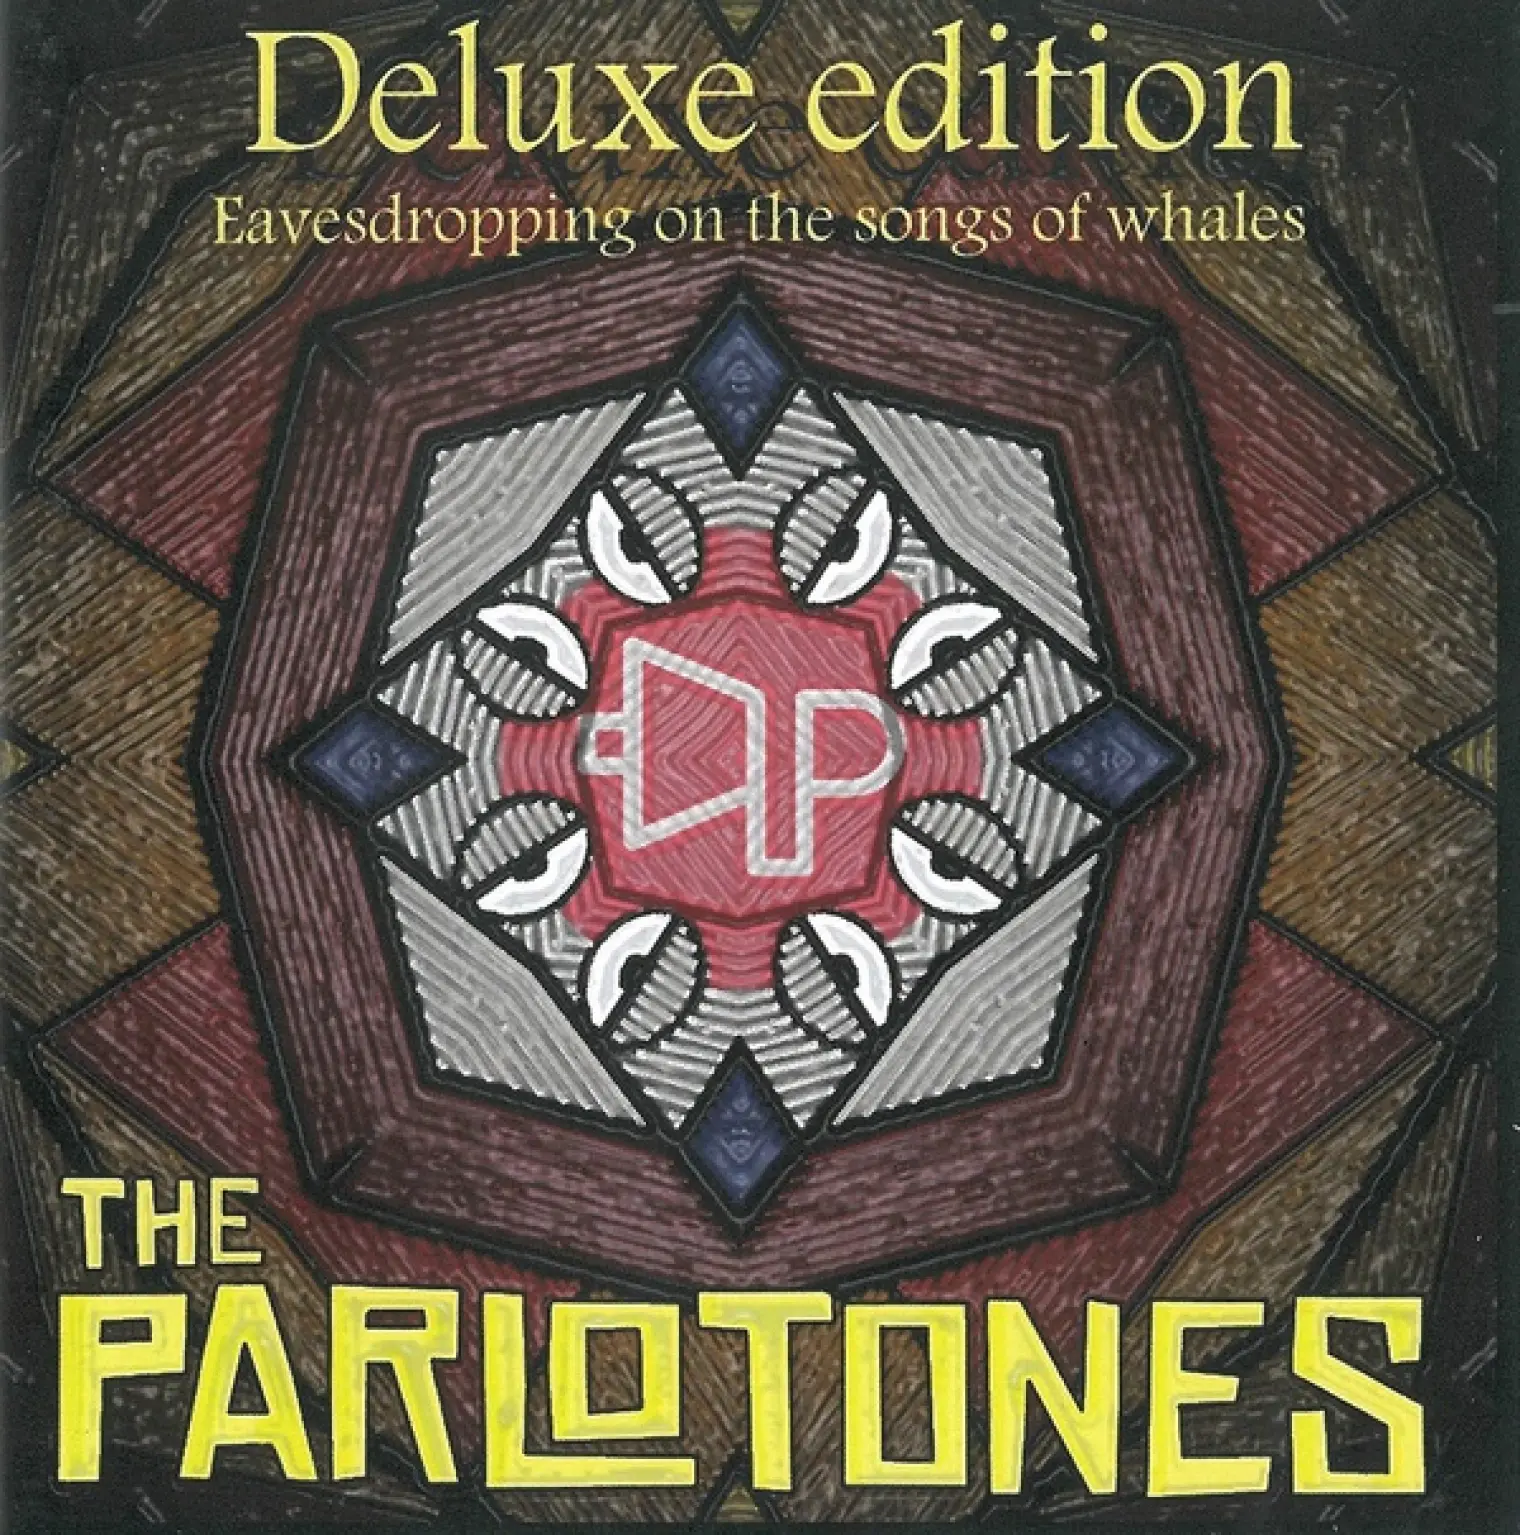 Eavesdropping on the Songs of Whales (Deluxe Edition) -  The Parlotones 